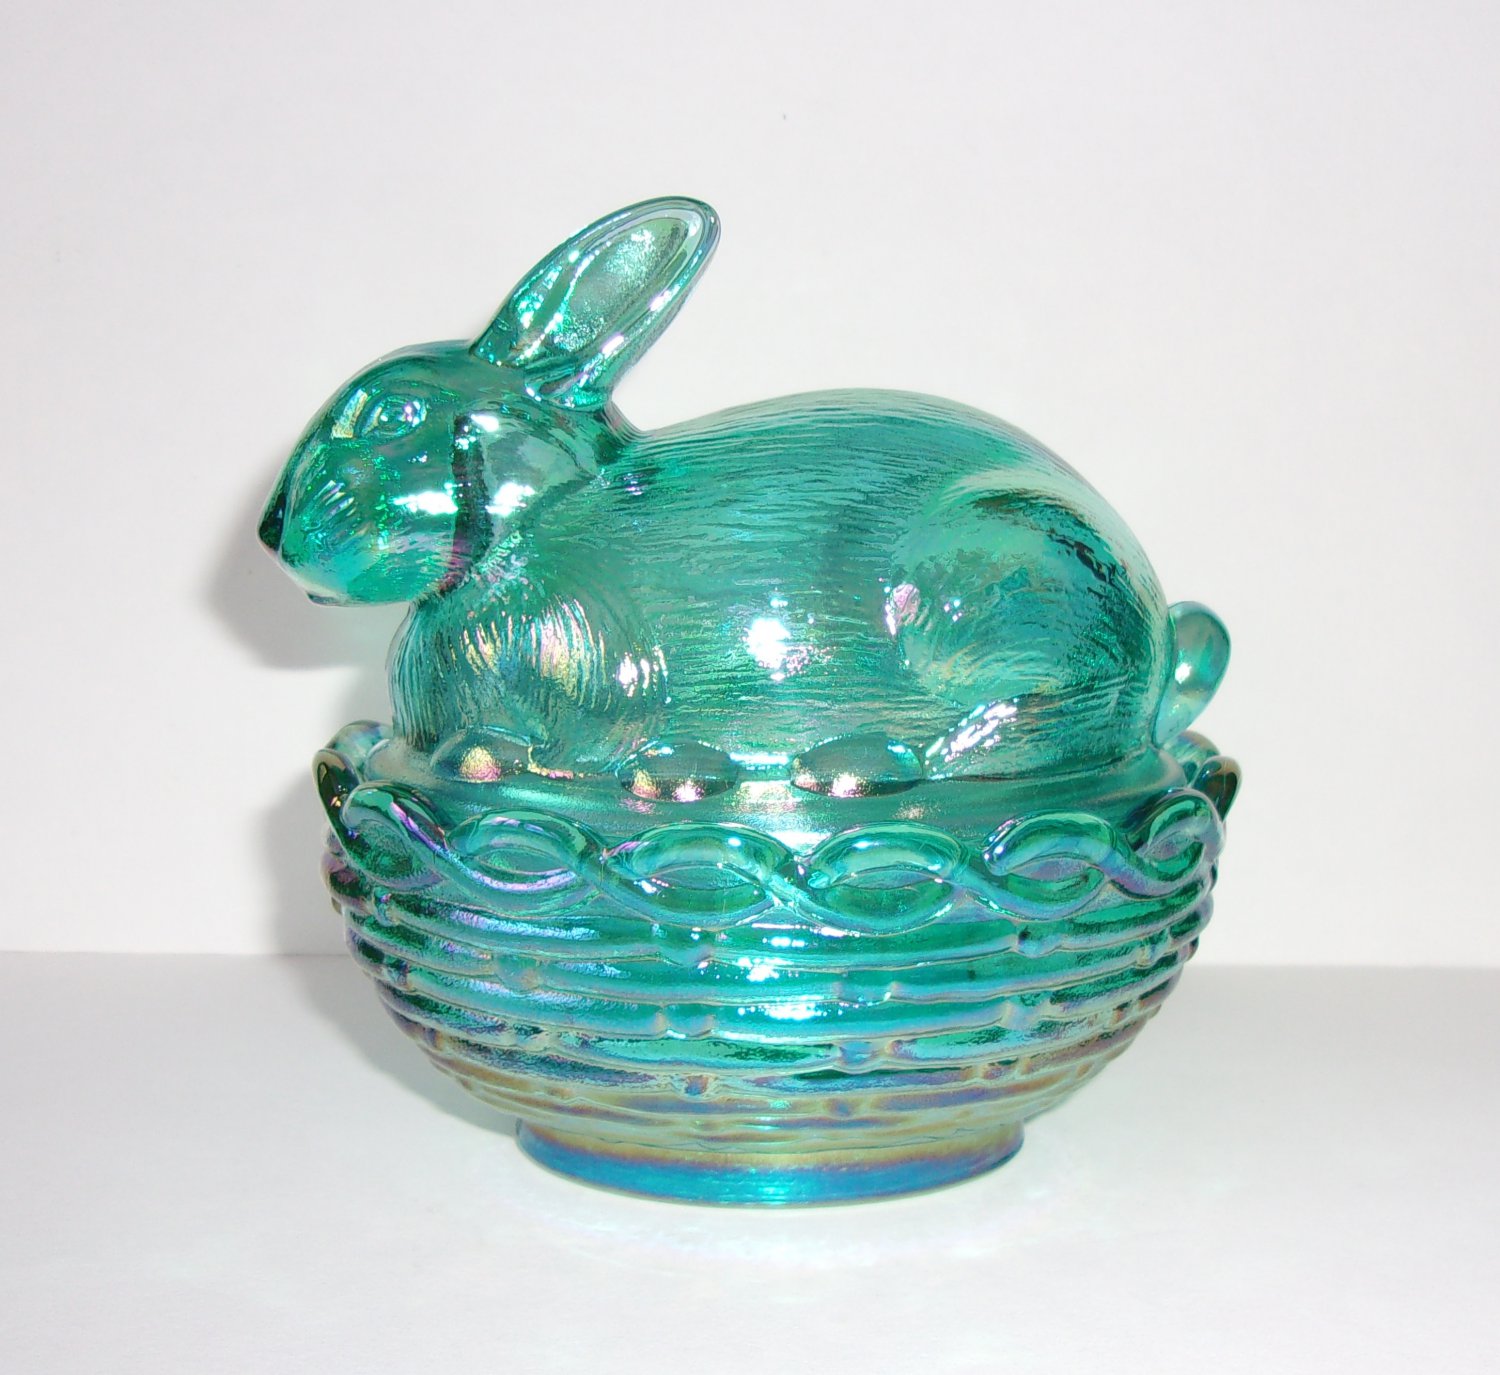 Mosser Glass Teal Carnival Easter Bunny Rabbit On Nest Basket Candy Dish Box!